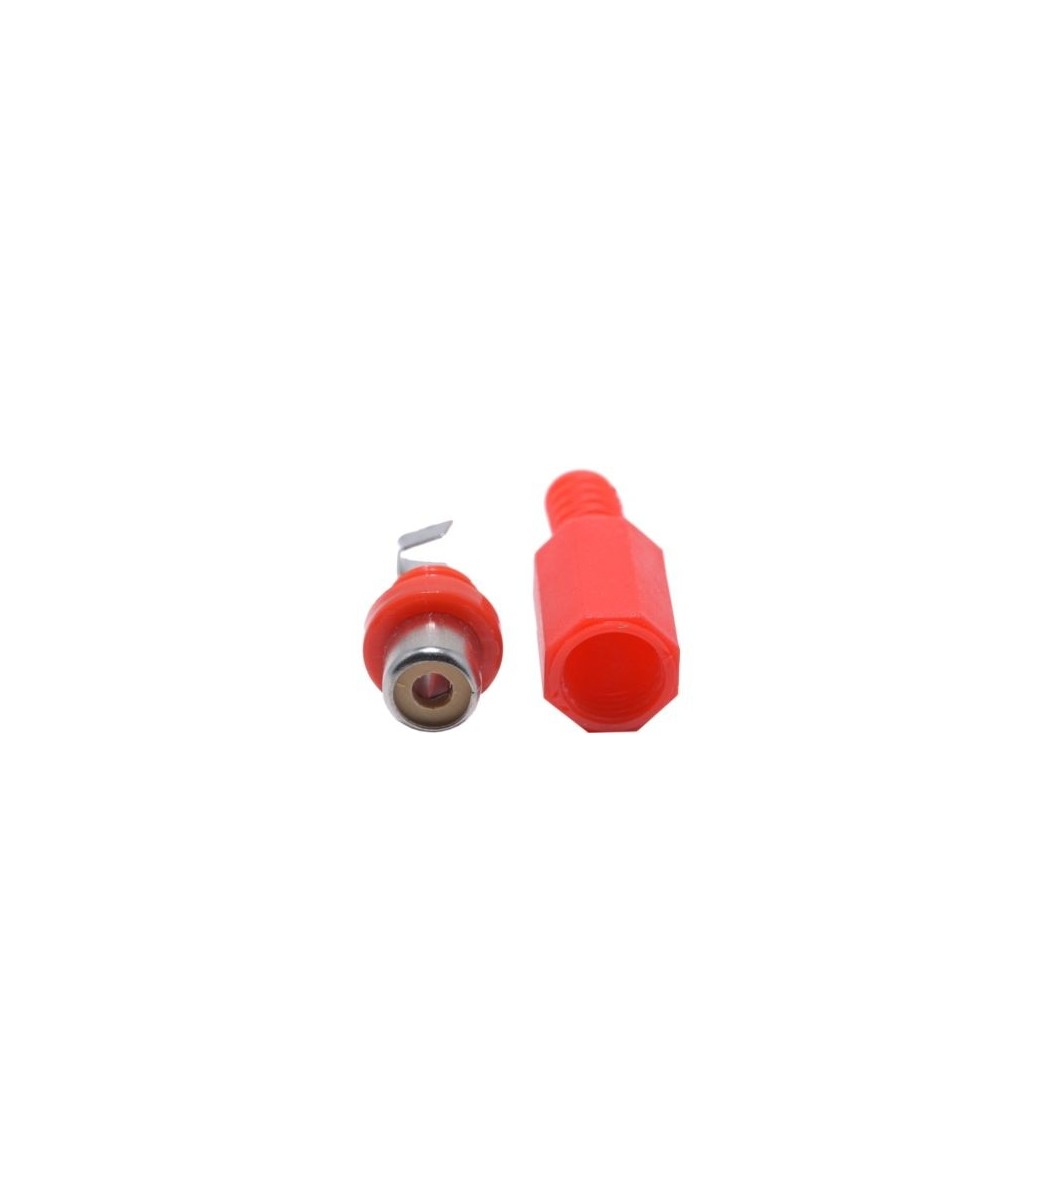 RCA Female Solder Connector with Strain Relief - Plastic - Red